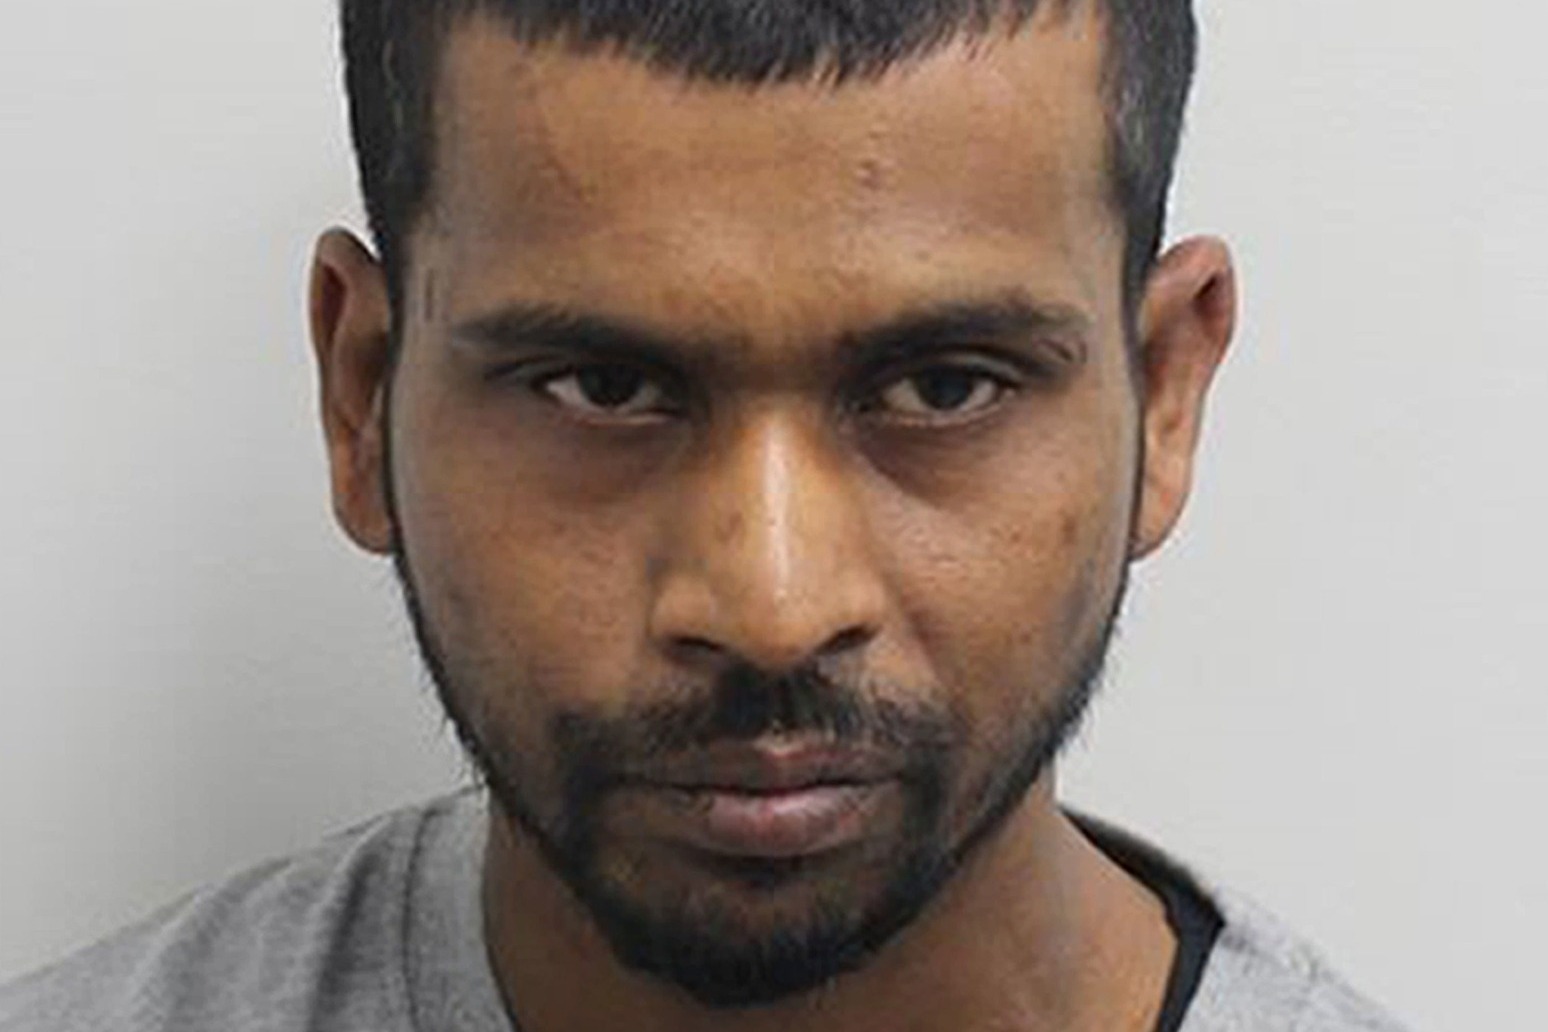 Man jailed for stabbing an emergency services worker. 